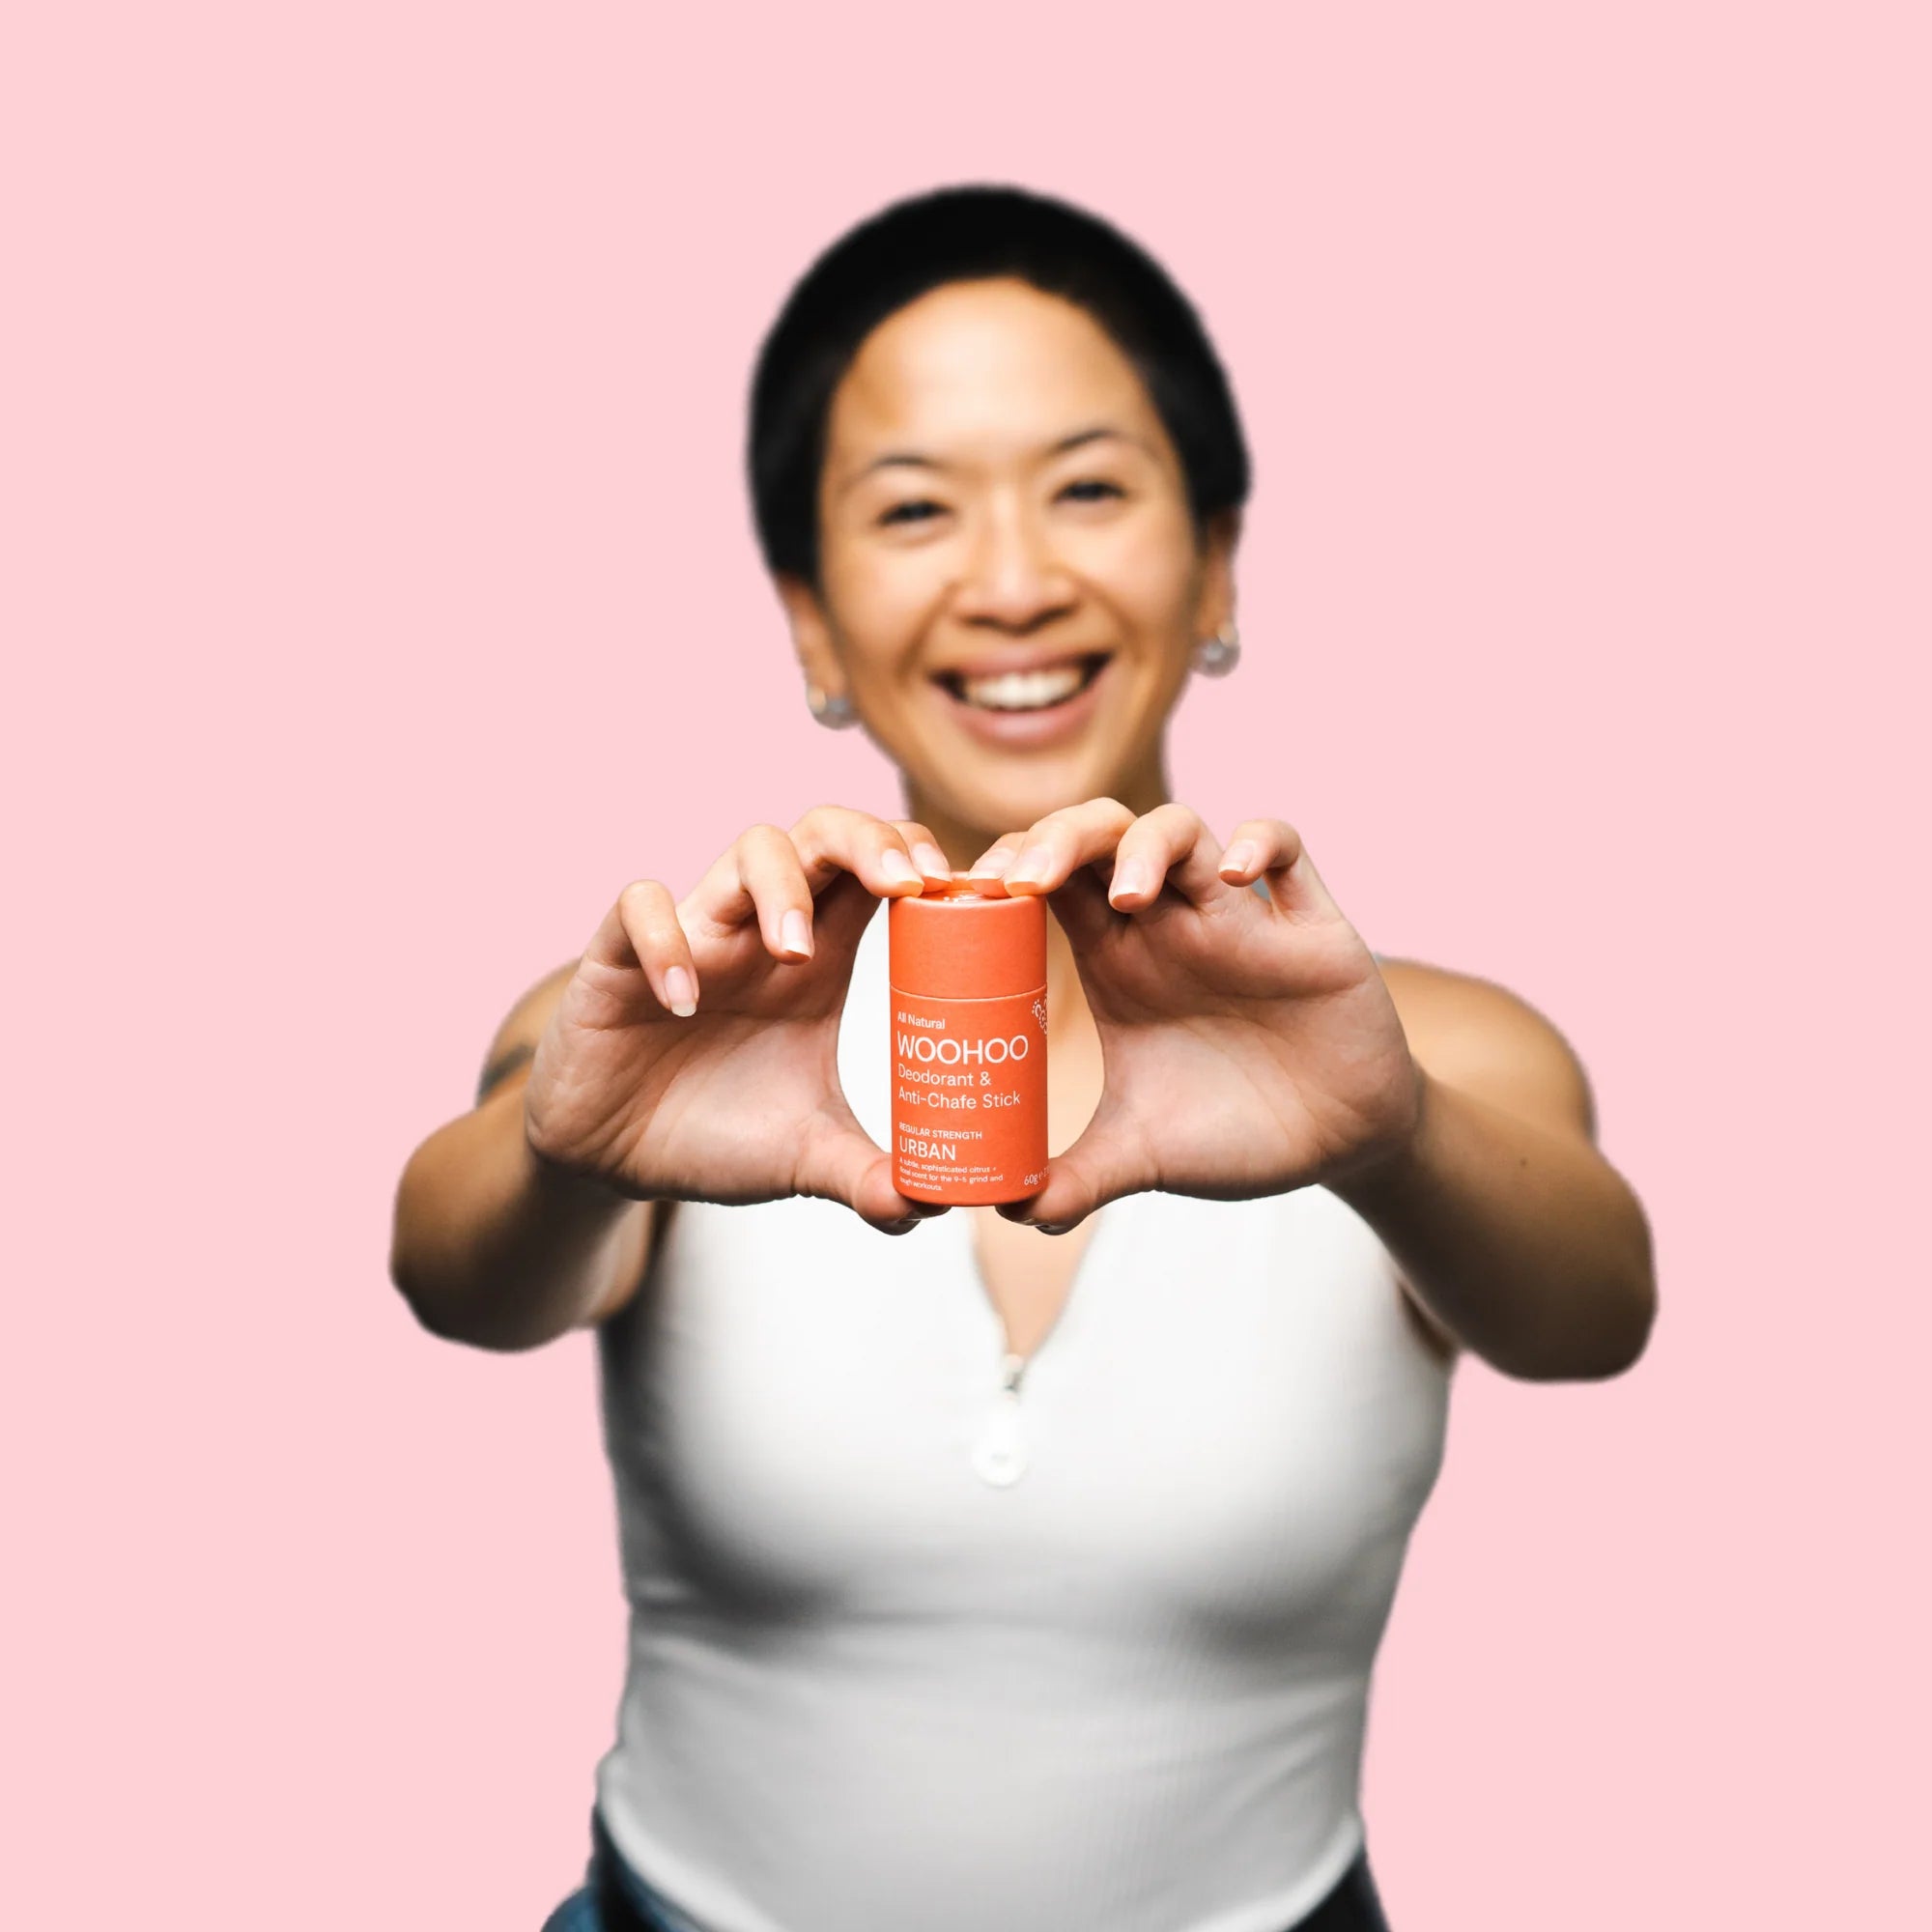 Image of a woman in a white sleeveless shirt smiling to the camera as she holds the Urban Natural Deodorant Stick in both hands extended towards the camera in front of a pink background